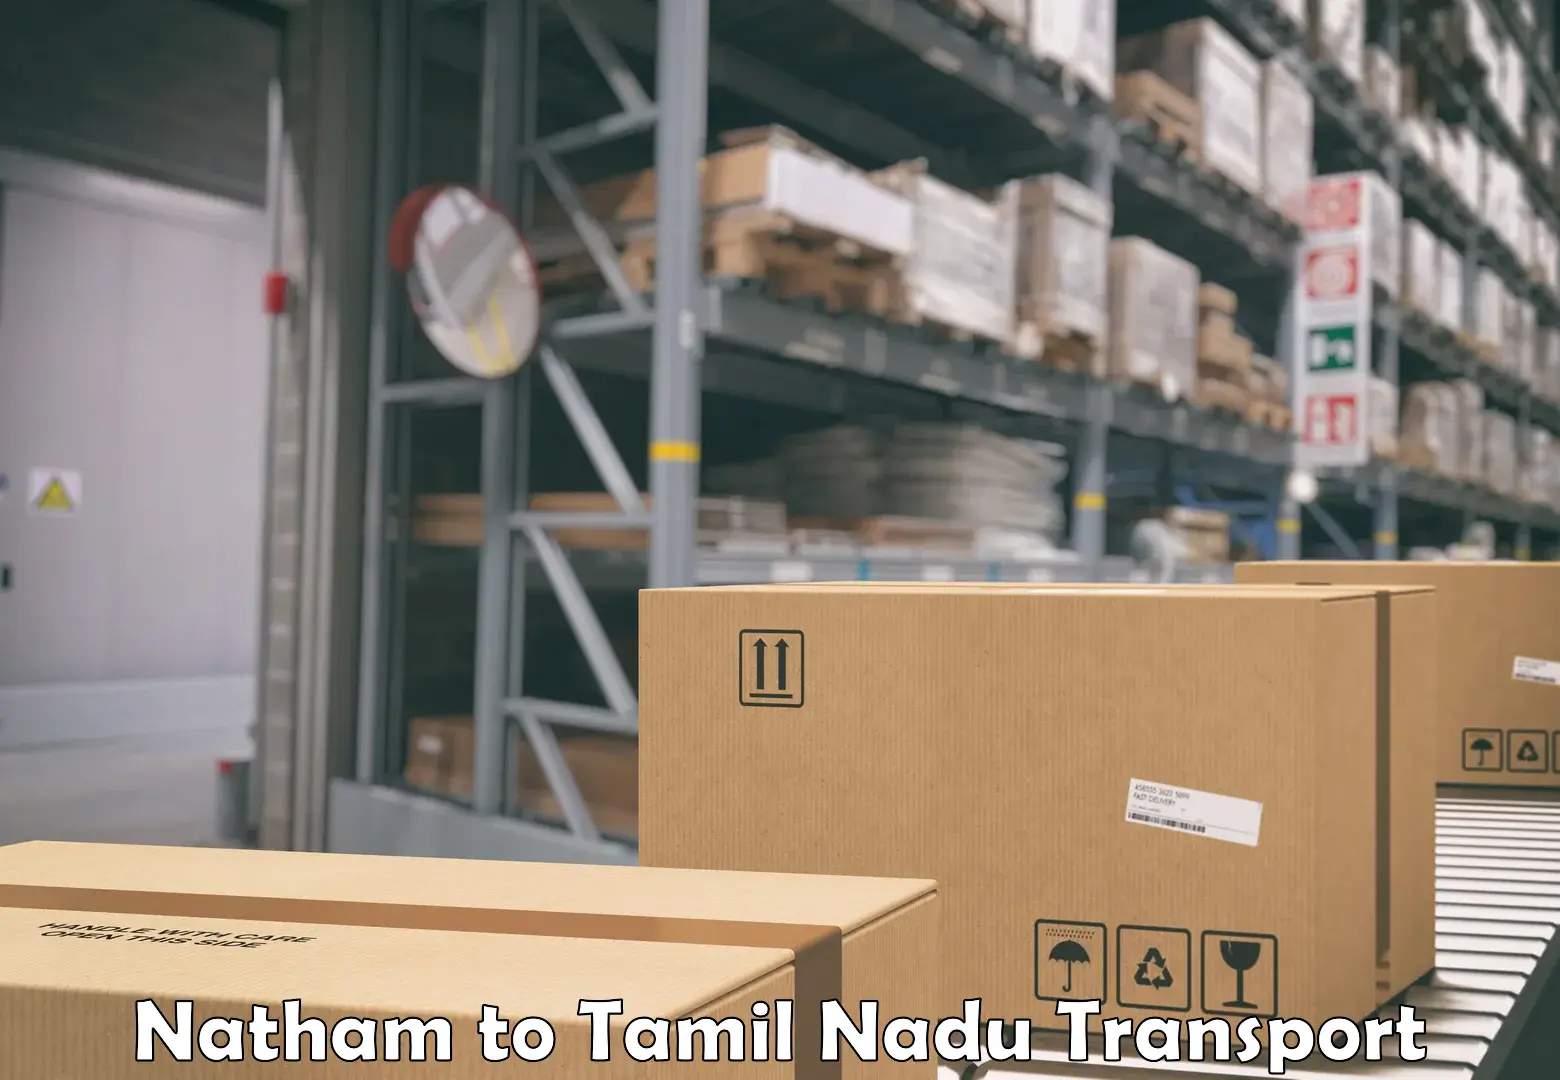 Parcel transport services Natham to Chennai